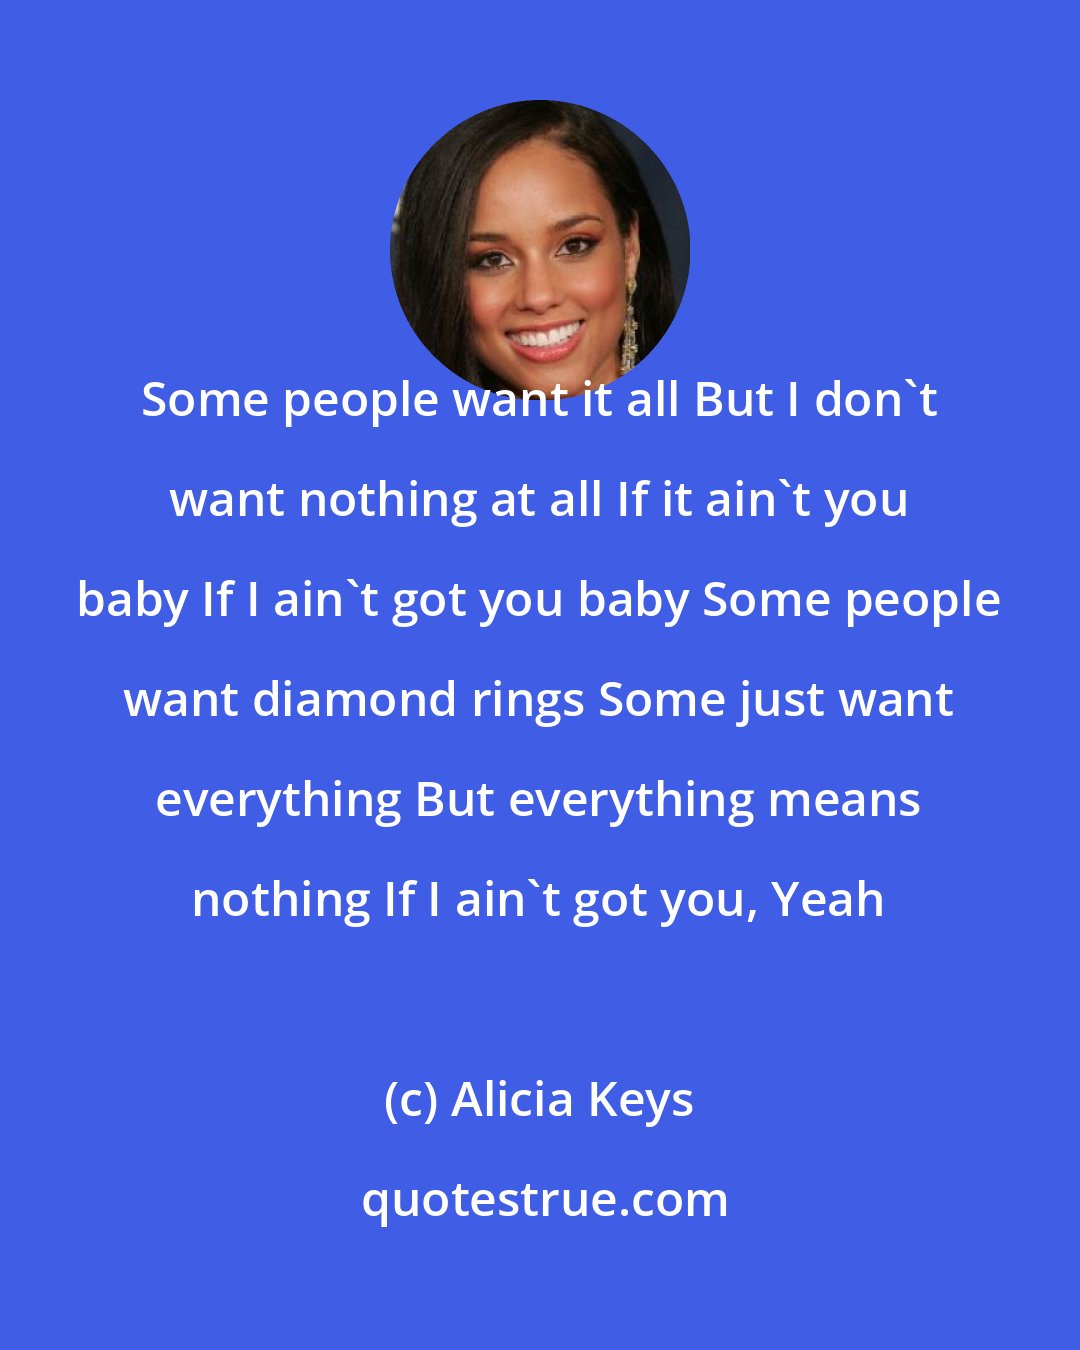 Alicia Keys: Some people want it all But I don't want nothing at all If it ain't you baby If I ain't got you baby Some people want diamond rings Some just want everything But everything means nothing If I ain't got you, Yeah